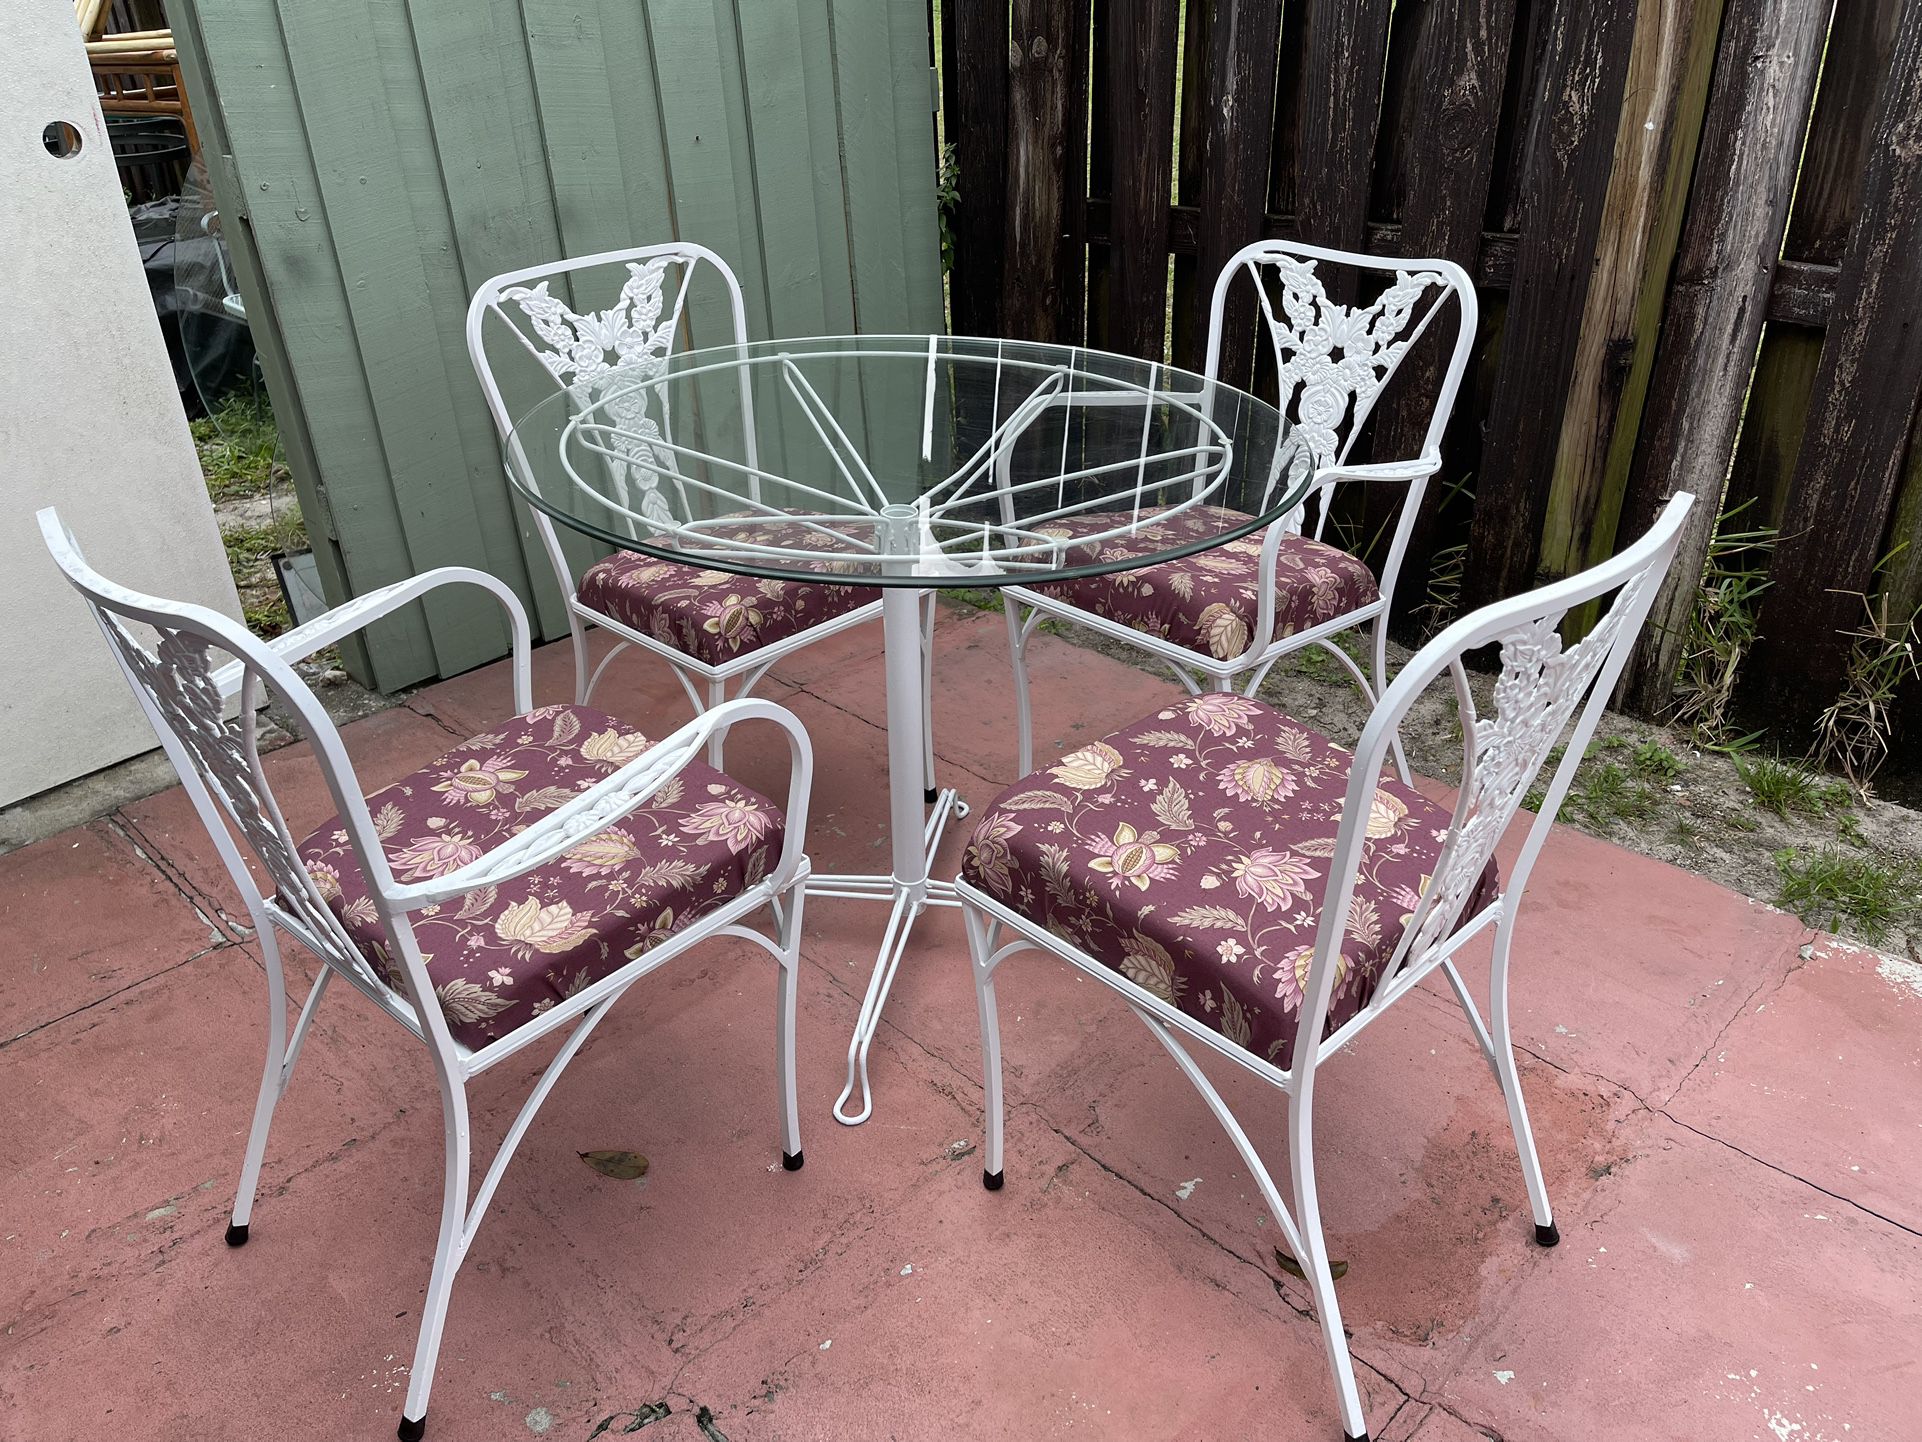 Metal Patio Furniture (Table 36”D X 30”H) In Excellent Condition With Removable Cushions (for Outdoor) $120 Firm On Price